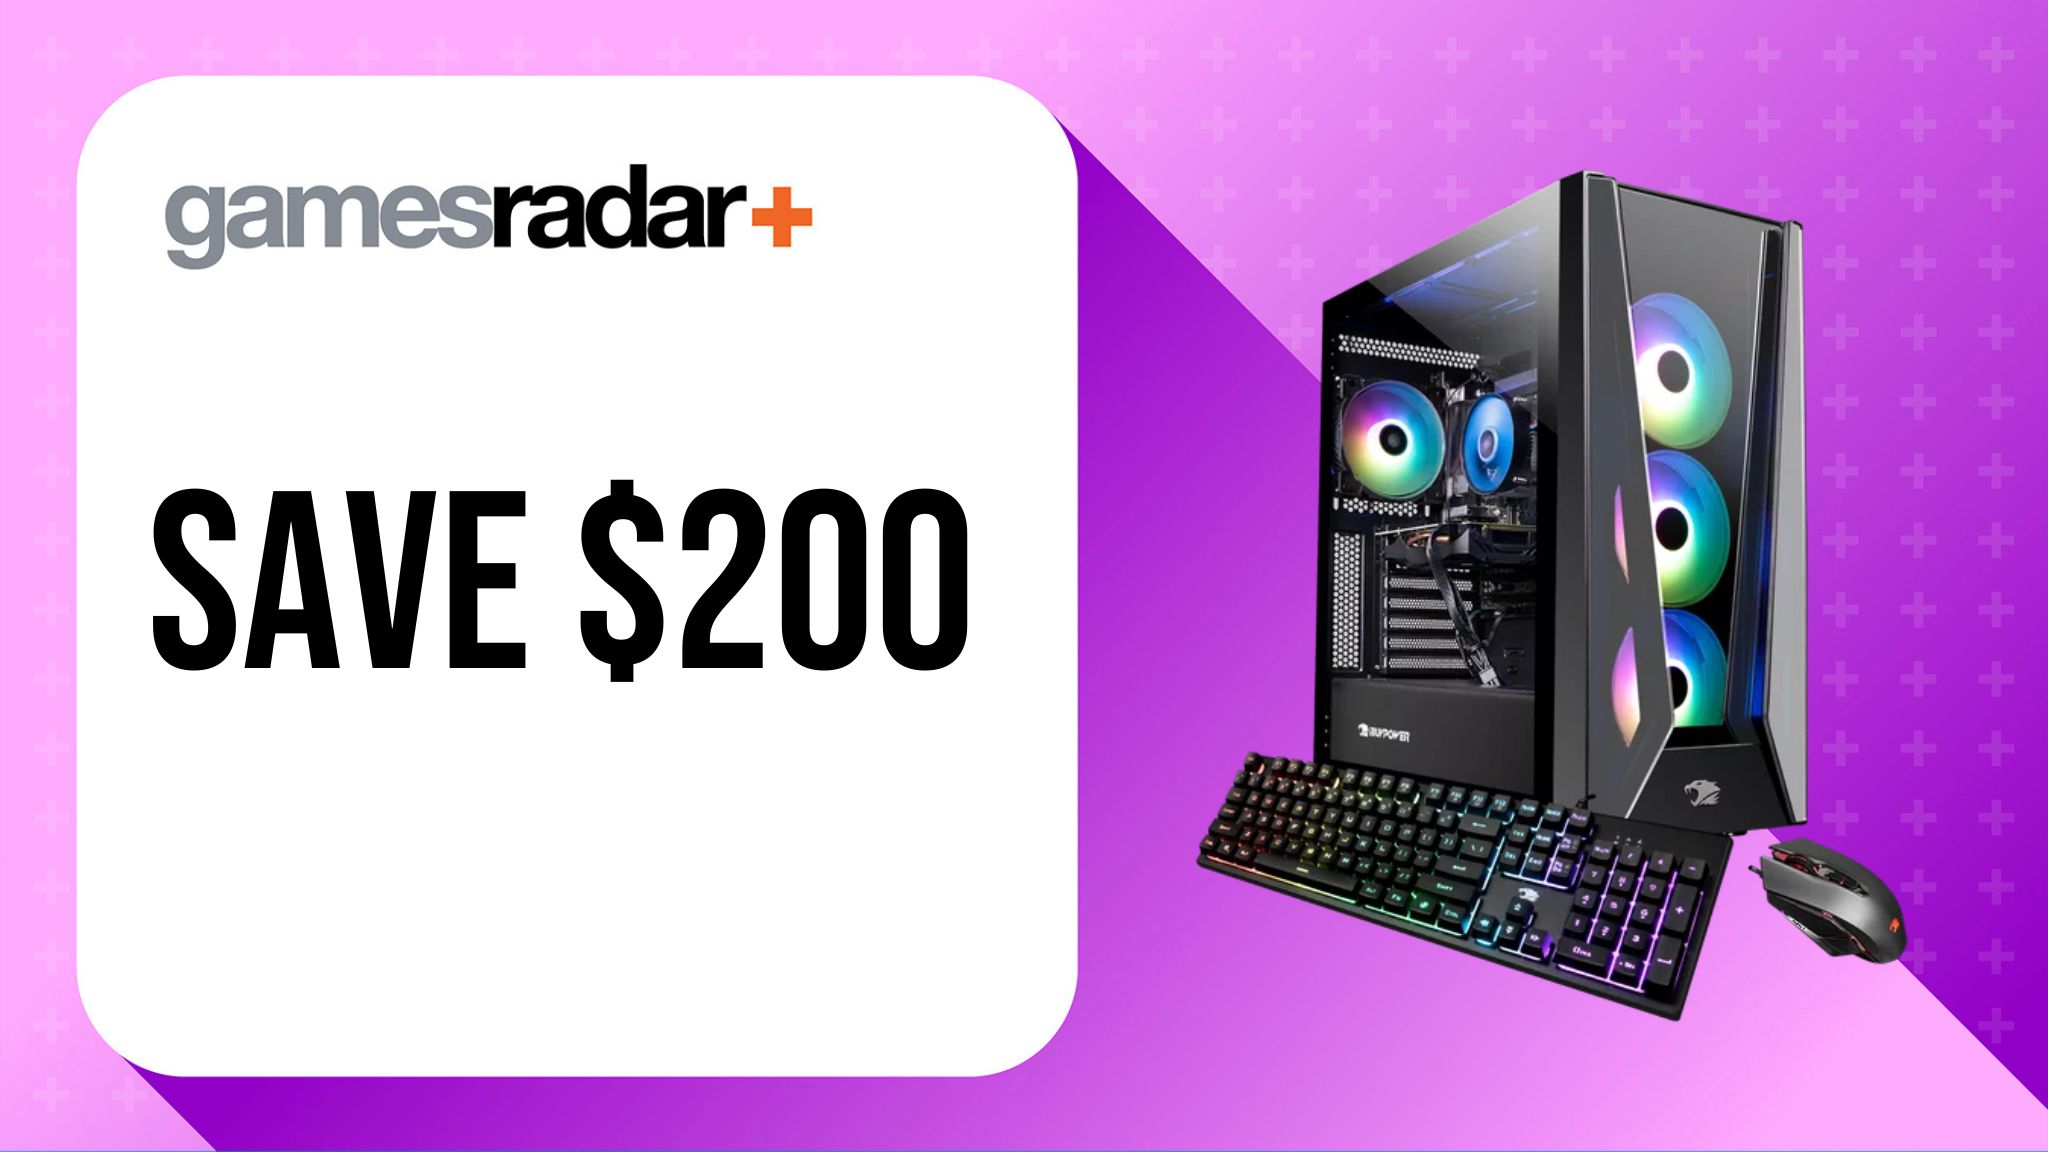 The iBuypower Trace MR258i deal saves $200